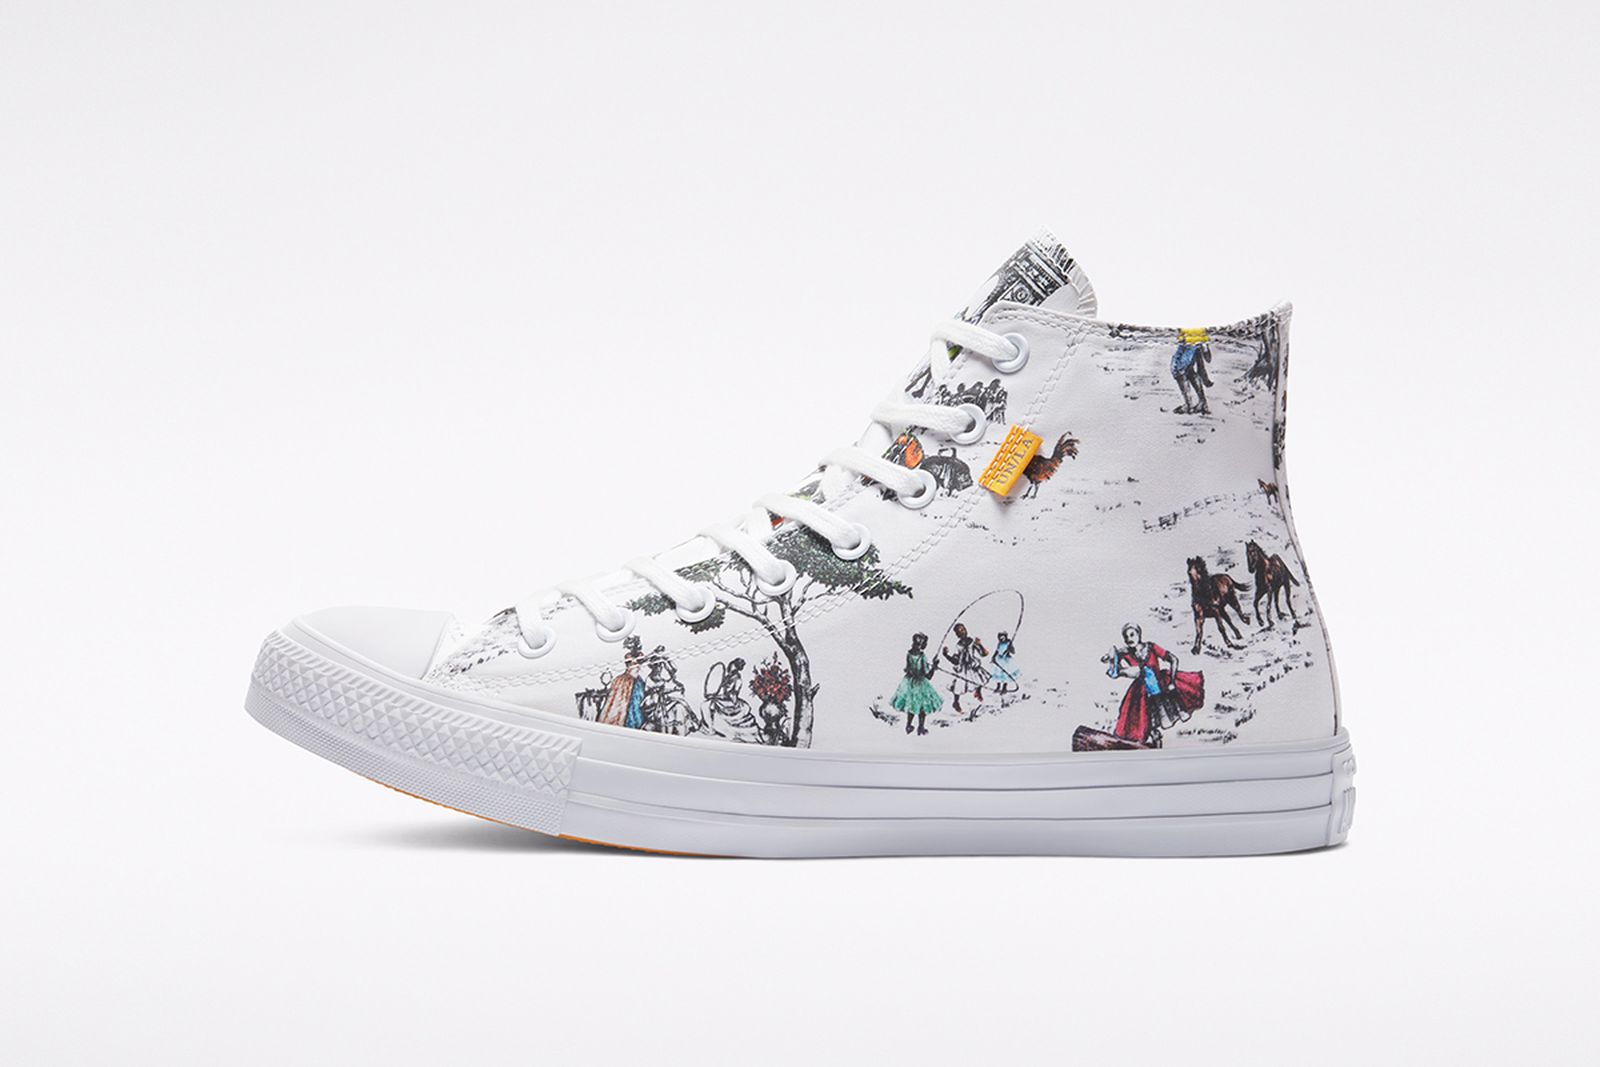 union-converse-chuck-taylor-all-star-release-date-price-1-02